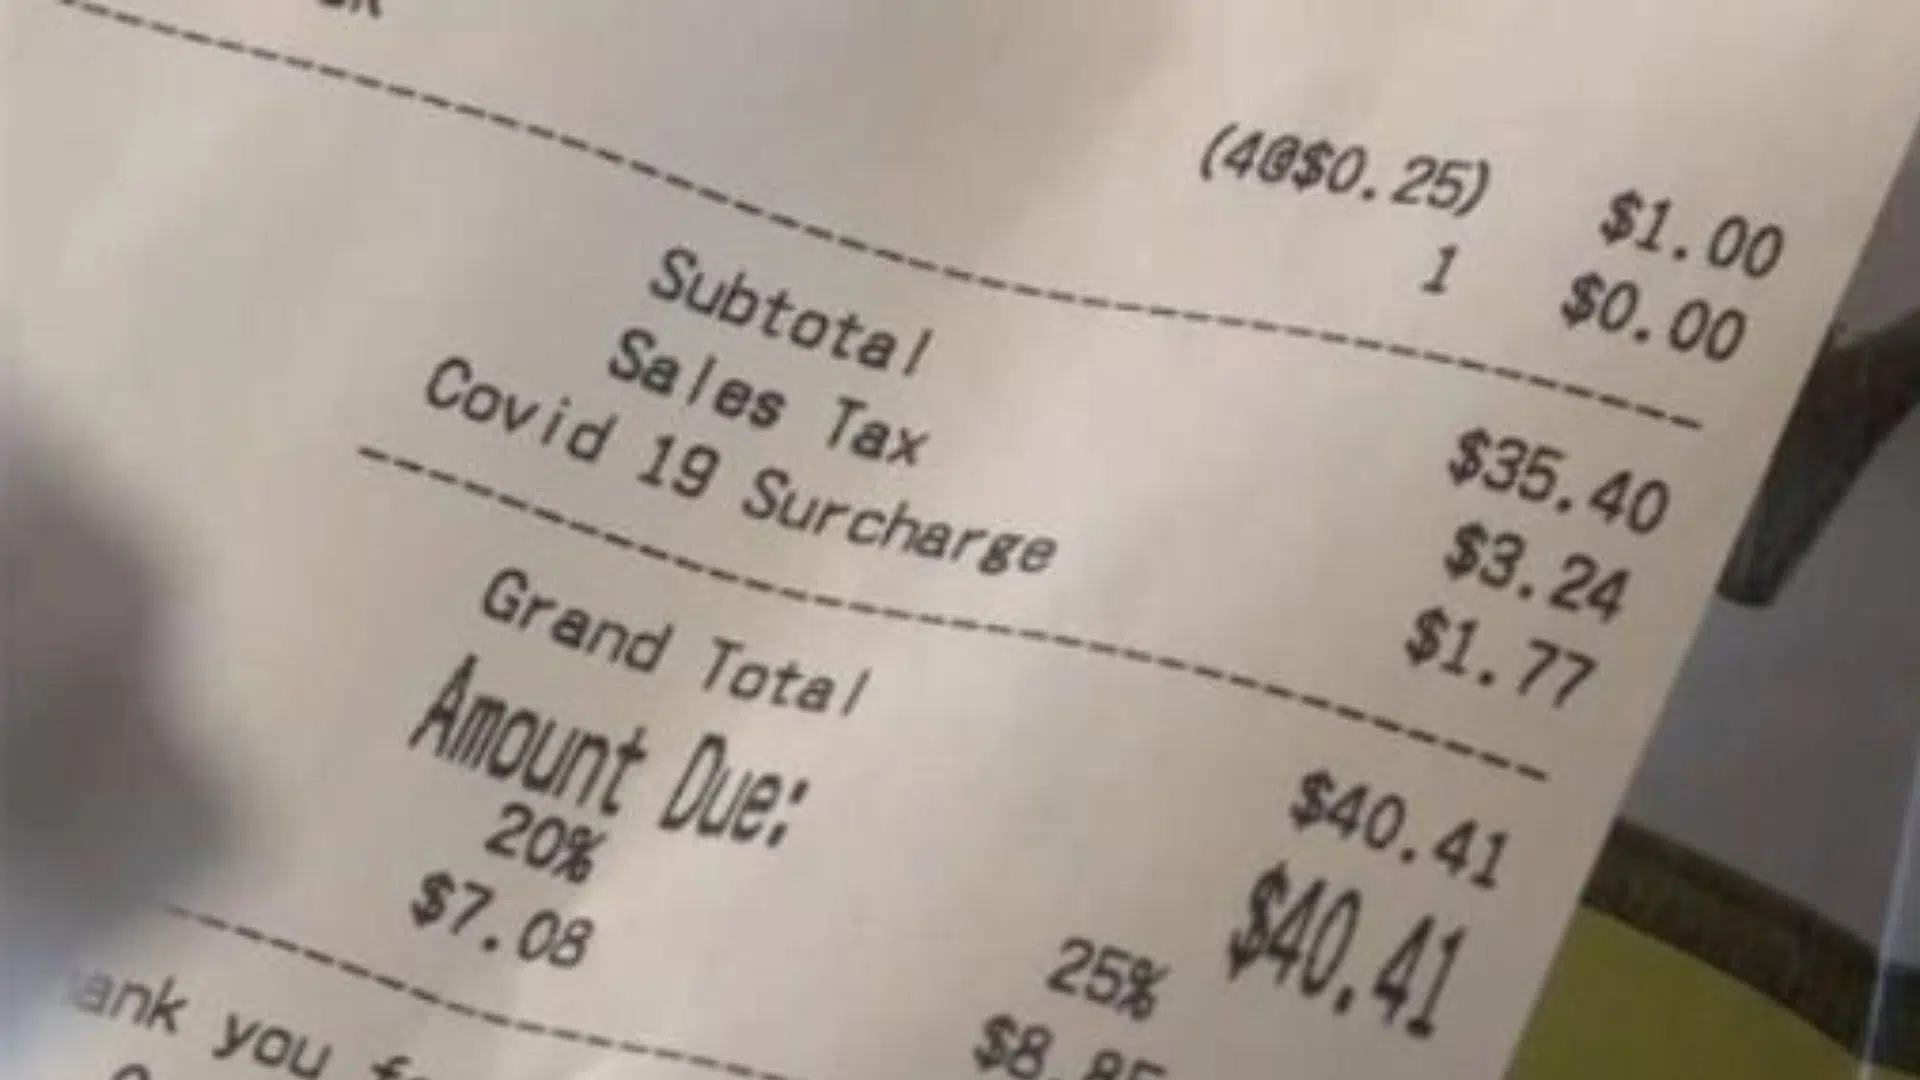 A COVID Surcharge may be coming to a receipt near you